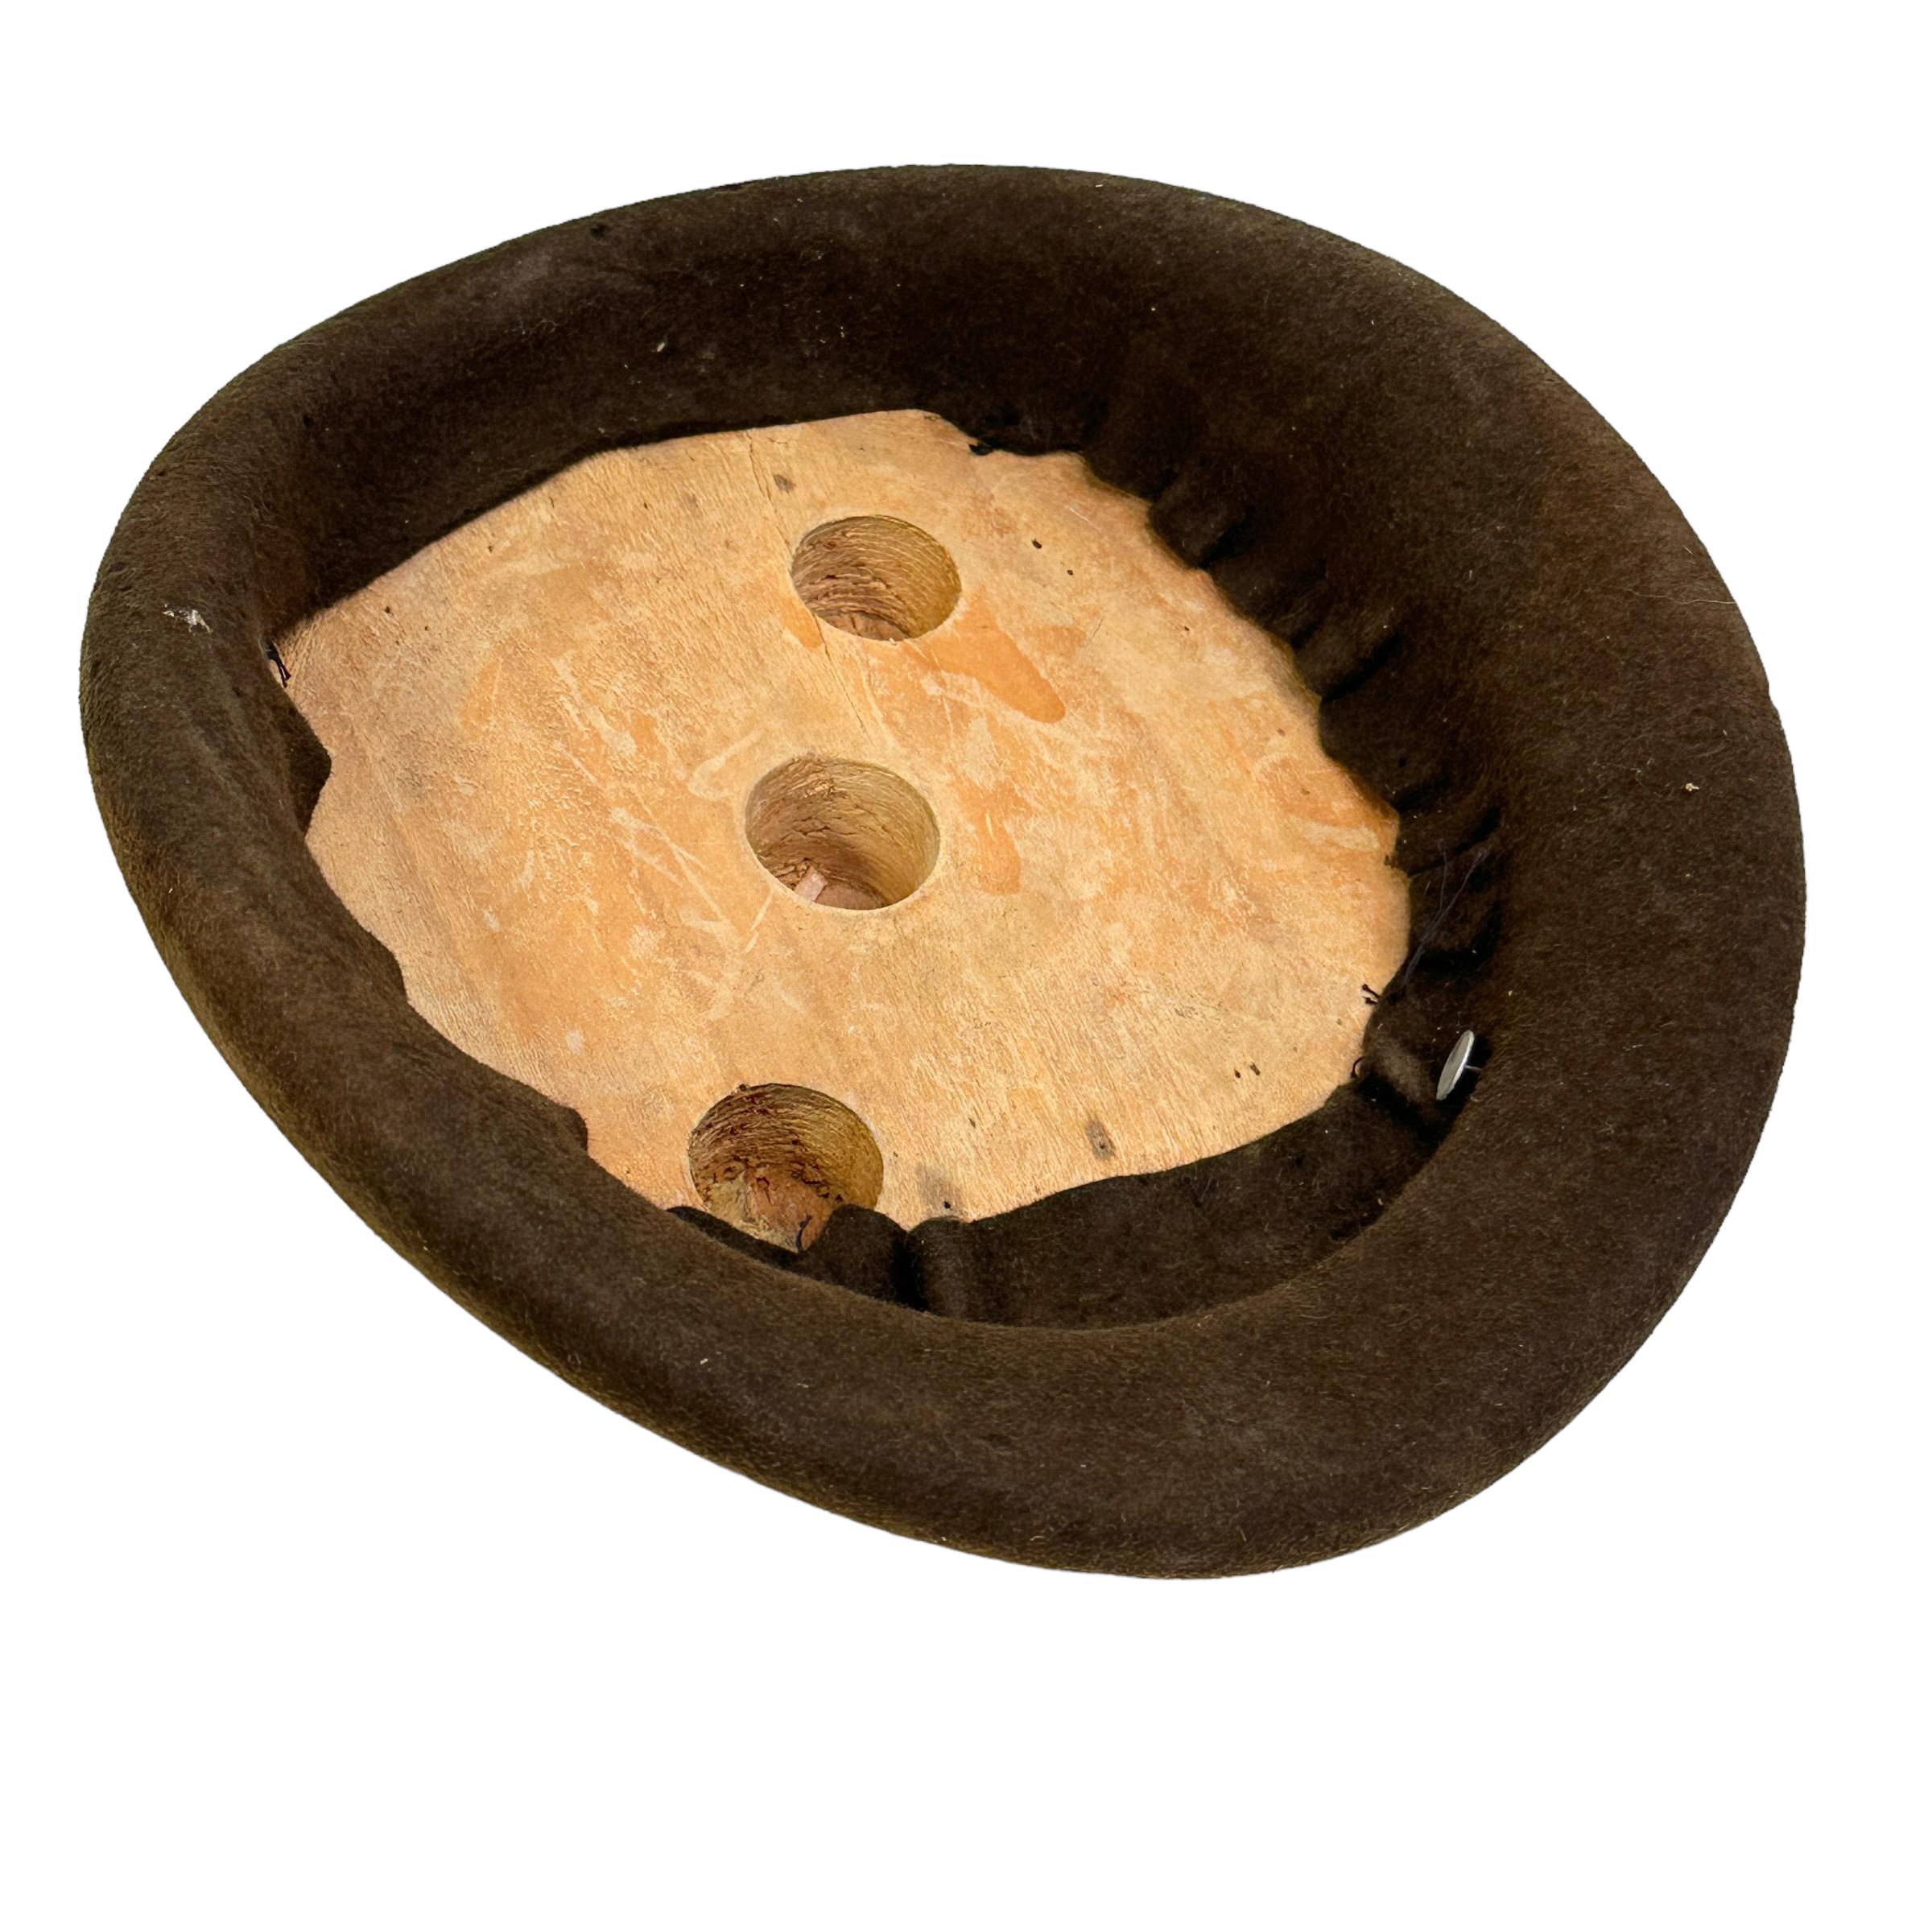 Mid-20th Century Vintage Wooden and Felt Hat Form Mold, Vienna, Austria, 1930s For Sale